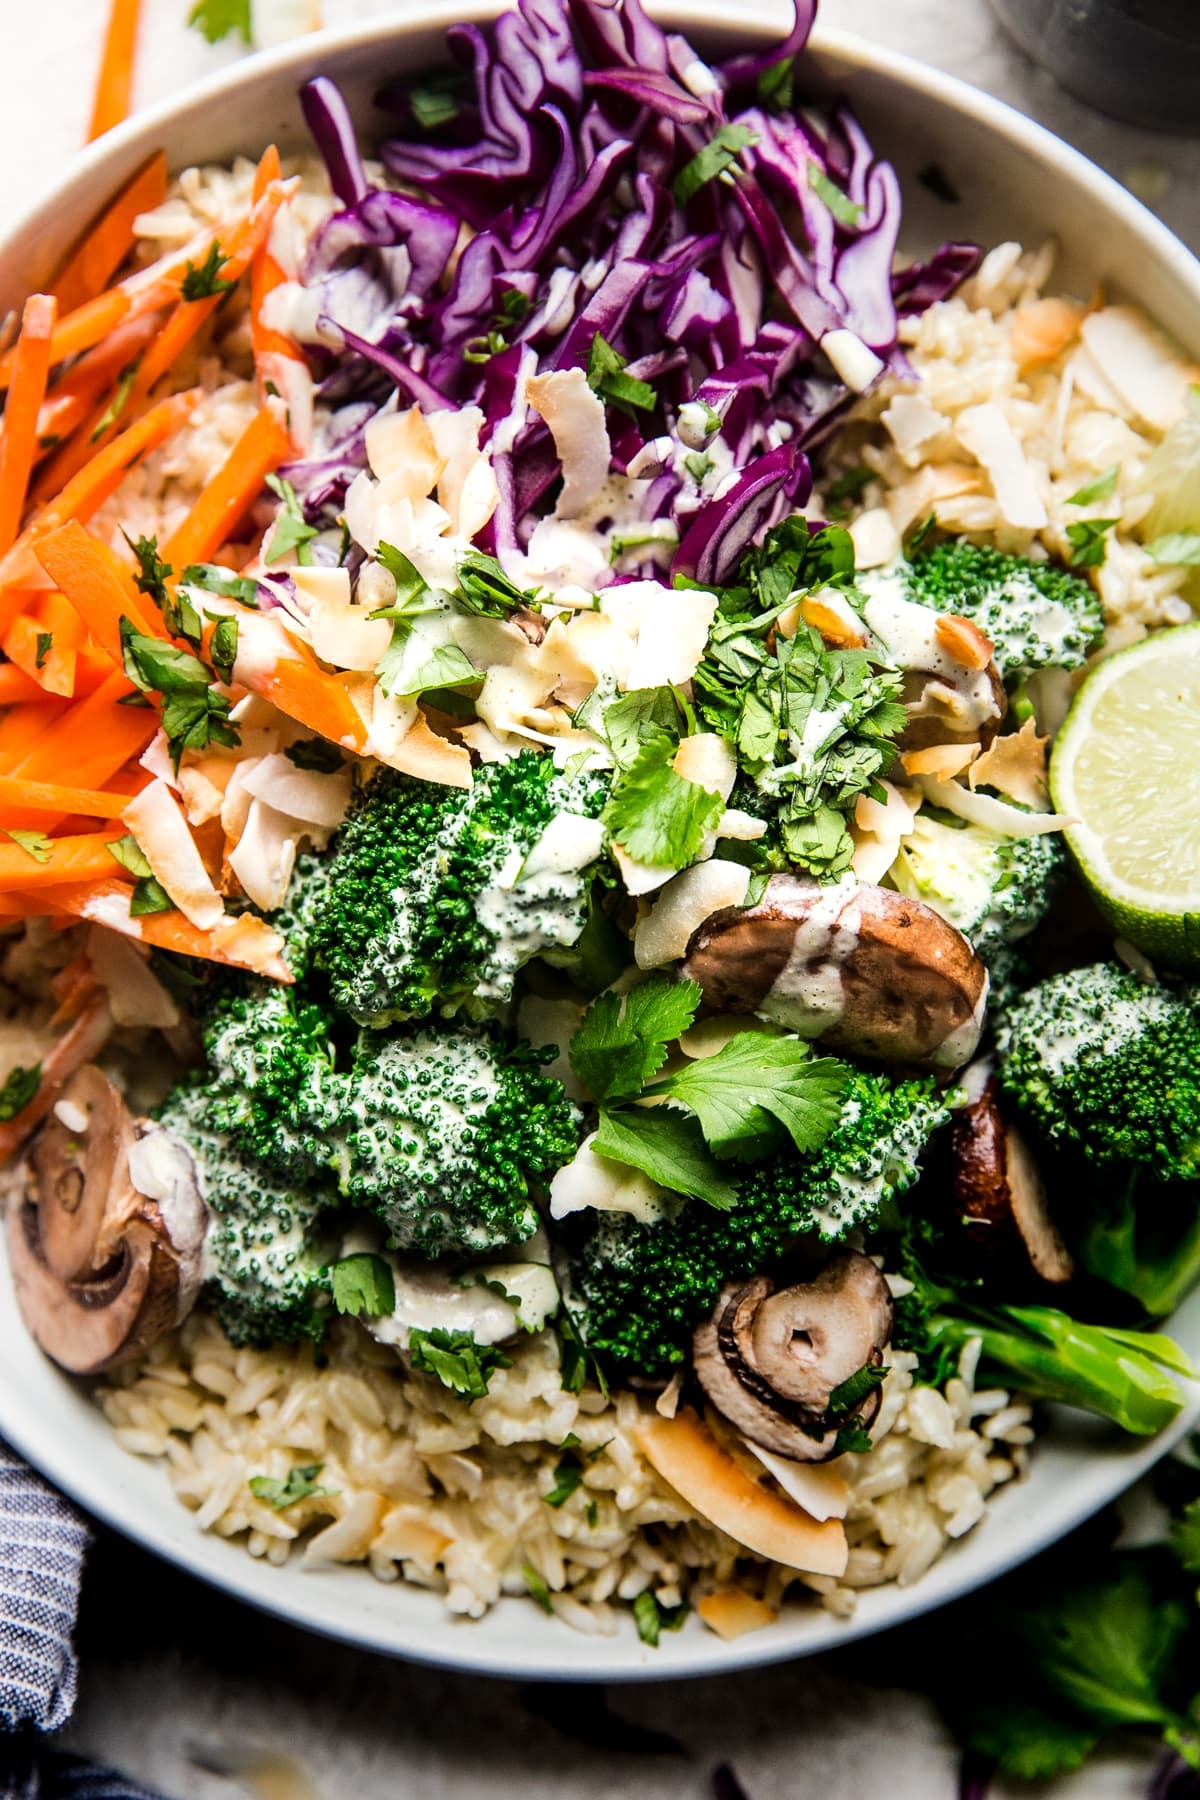 Vegetarian Green Curry Budha Bowl with brown rice, red cabbage, broccoli, mushrooms, carrots and toasted coconut